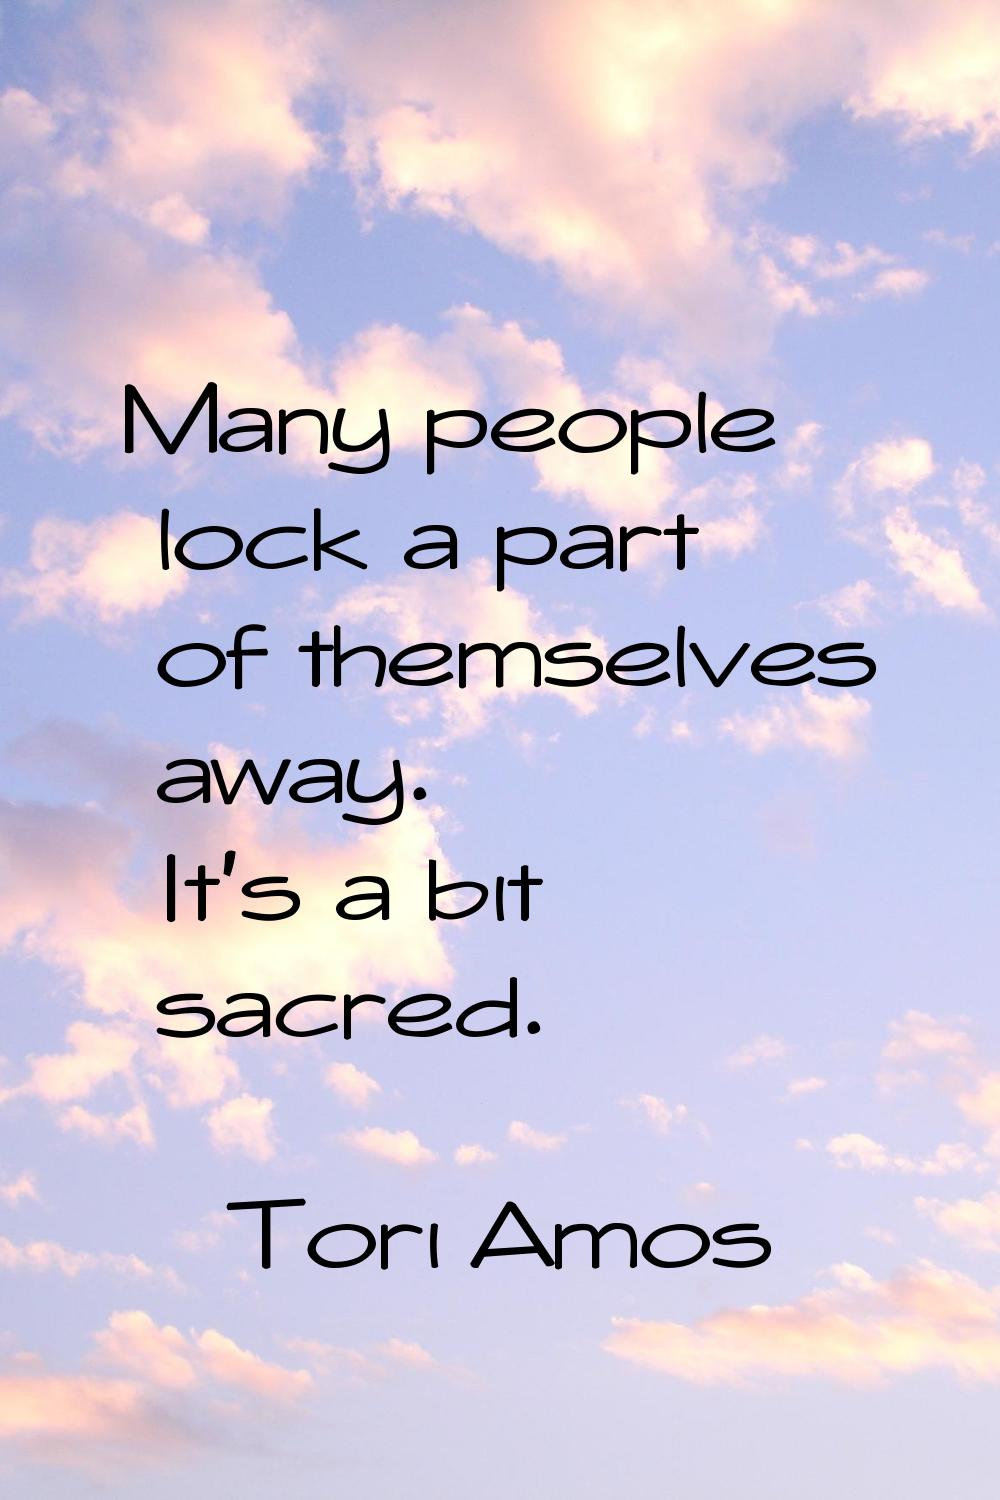 Many people lock a part of themselves away. It's a bit sacred.